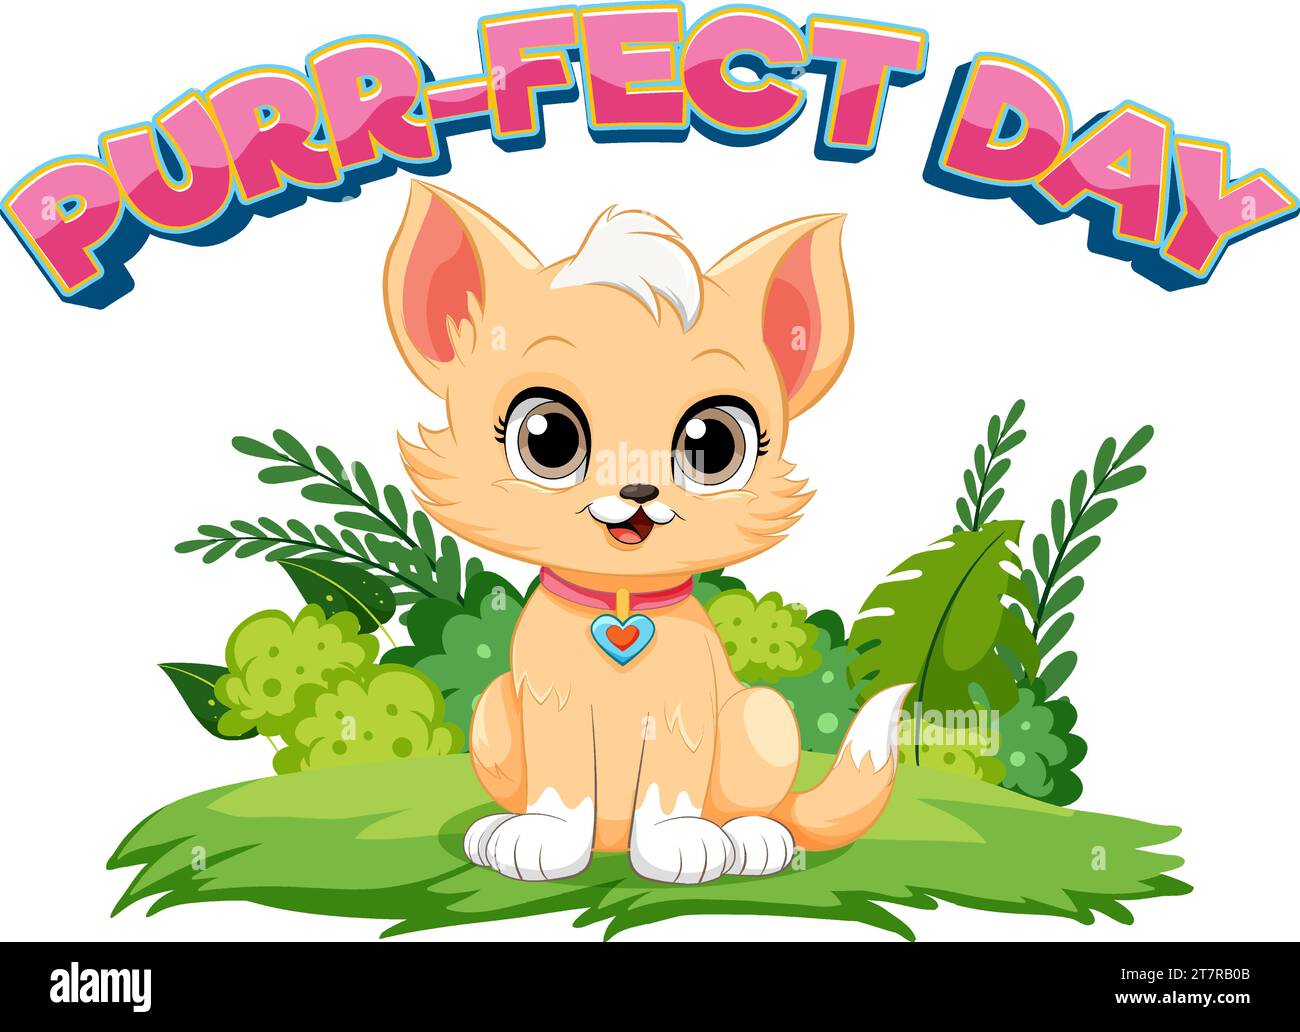 A hilarious cartoon illustration capturing a purr-fect day for animals Stock Vector